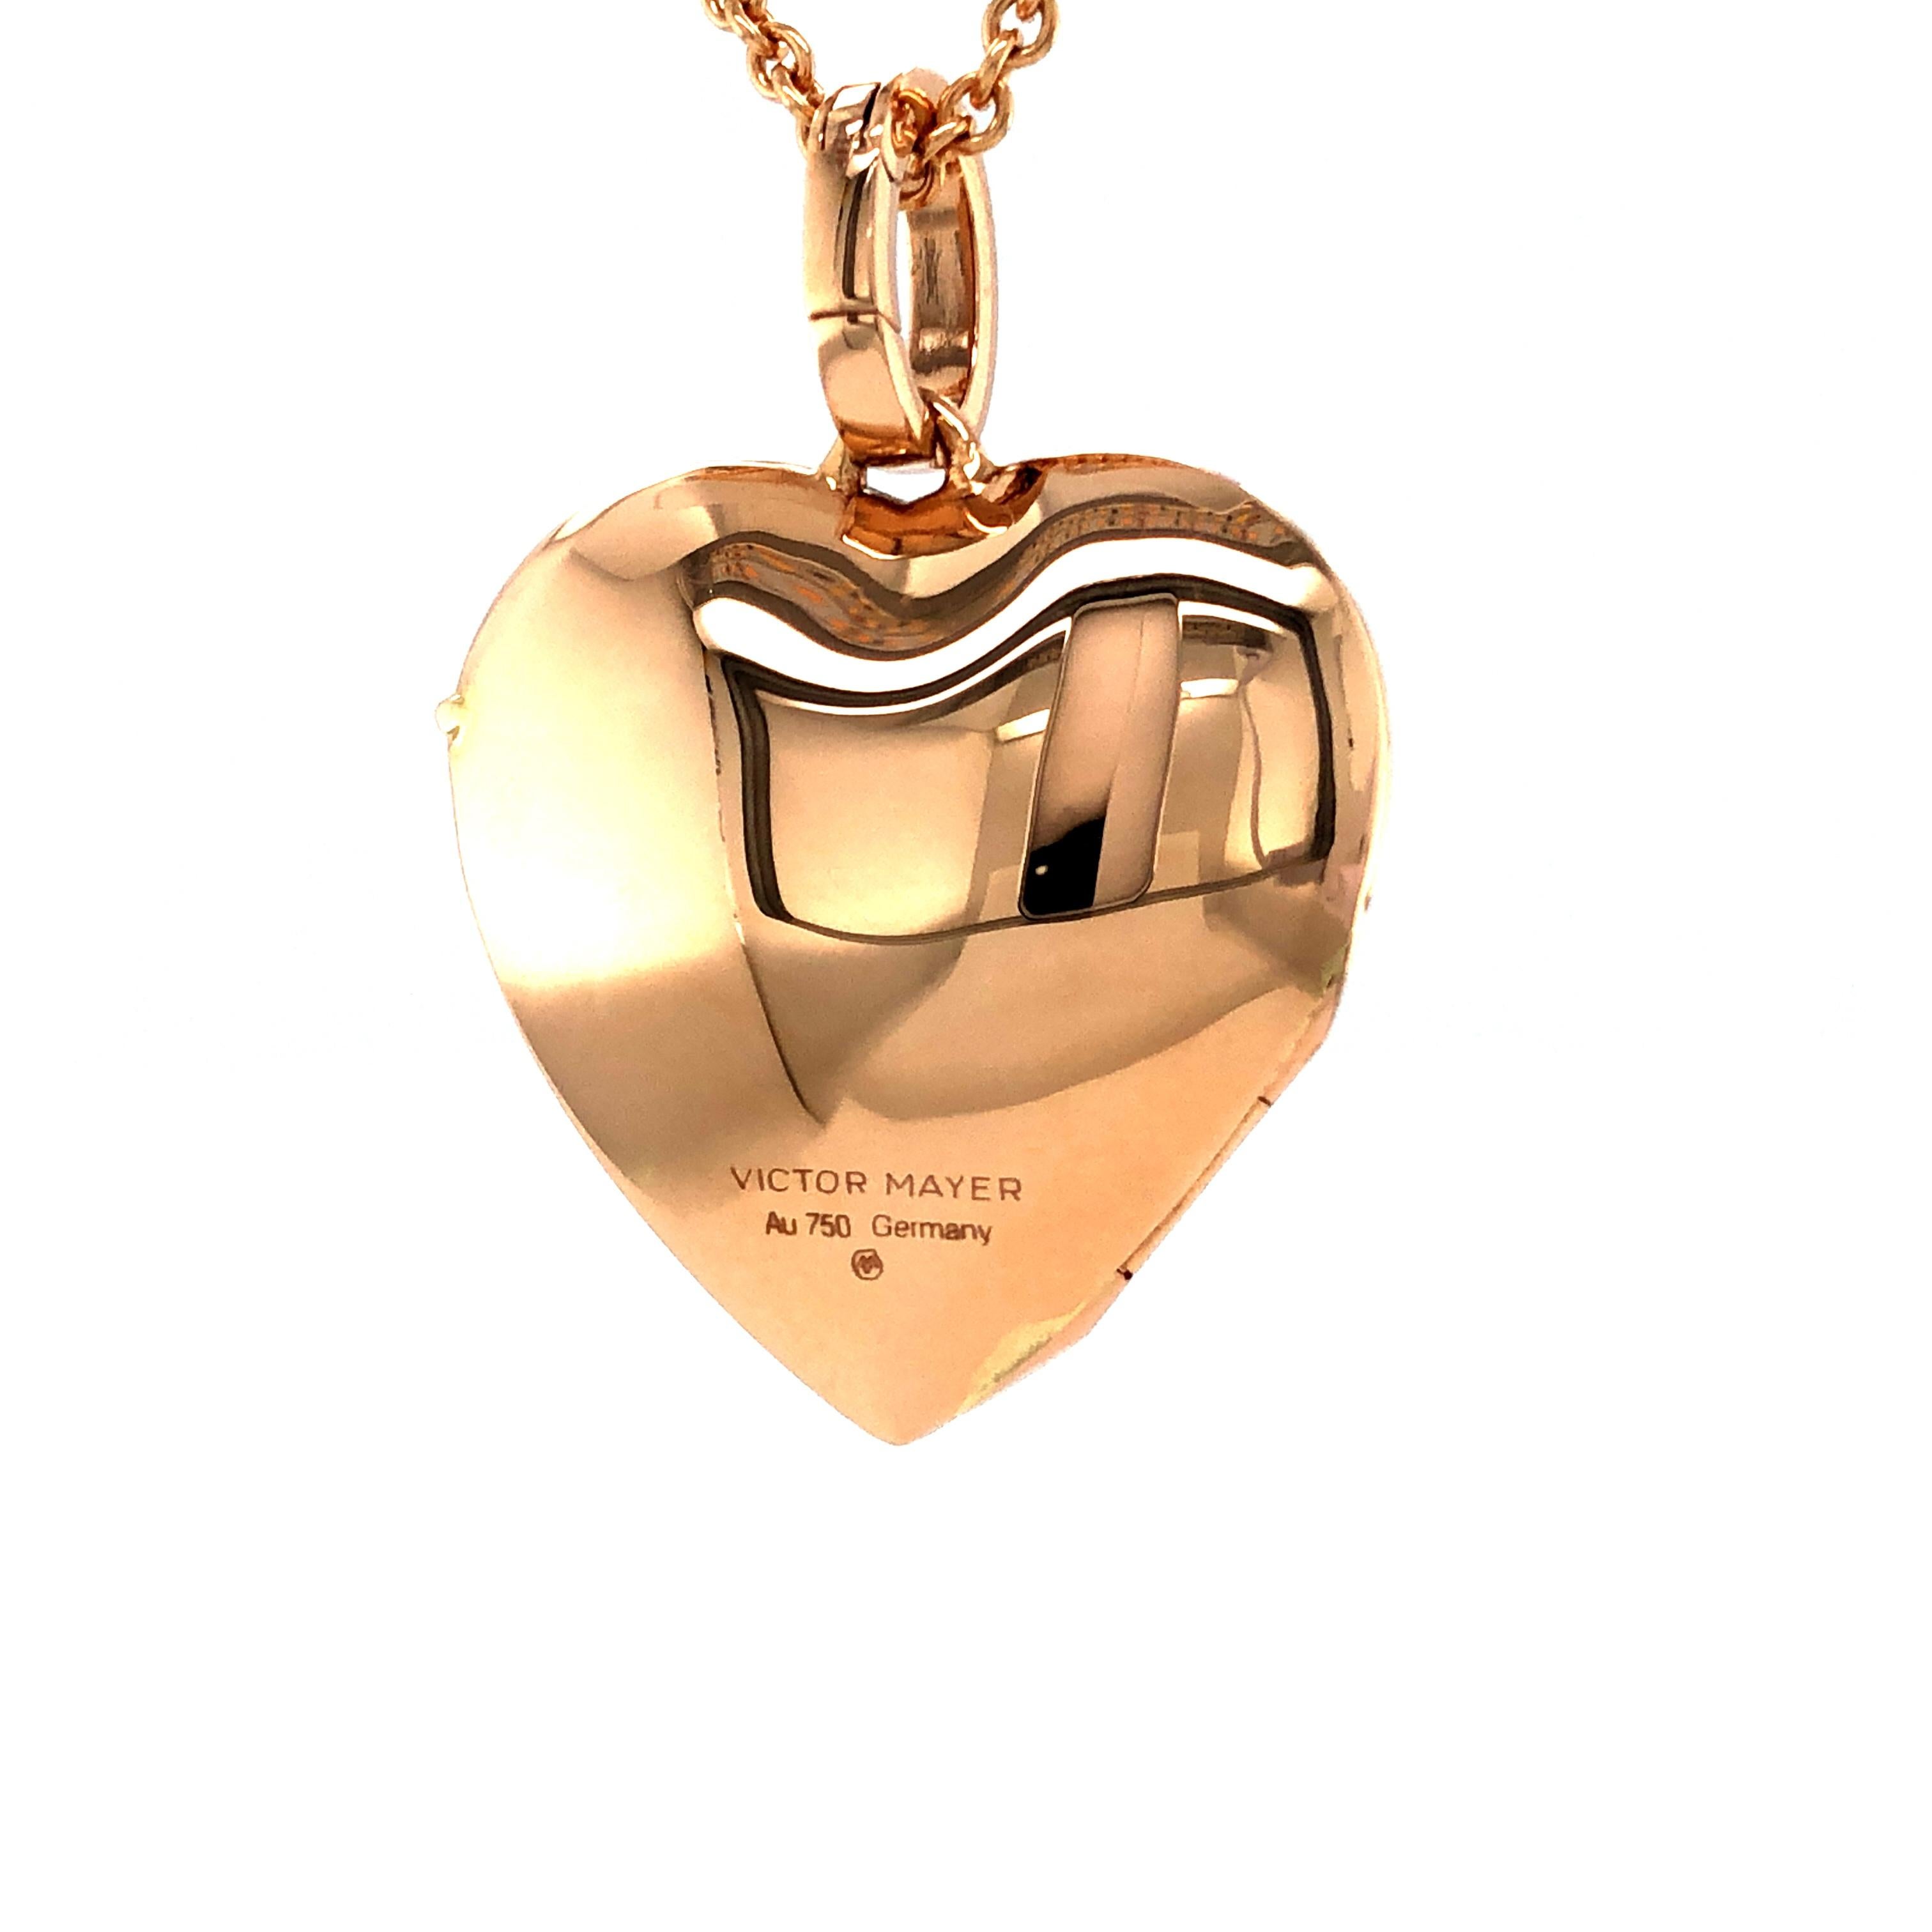 Victor Mayer customizable heart shaped polished pendant locket 18k rose gold, Hallmark collection, measurements app. 25 mm x 25 mm

About the creator Victor Mayer
Victor Mayer is internationally renowned for elegant timeless designs and unrivalled